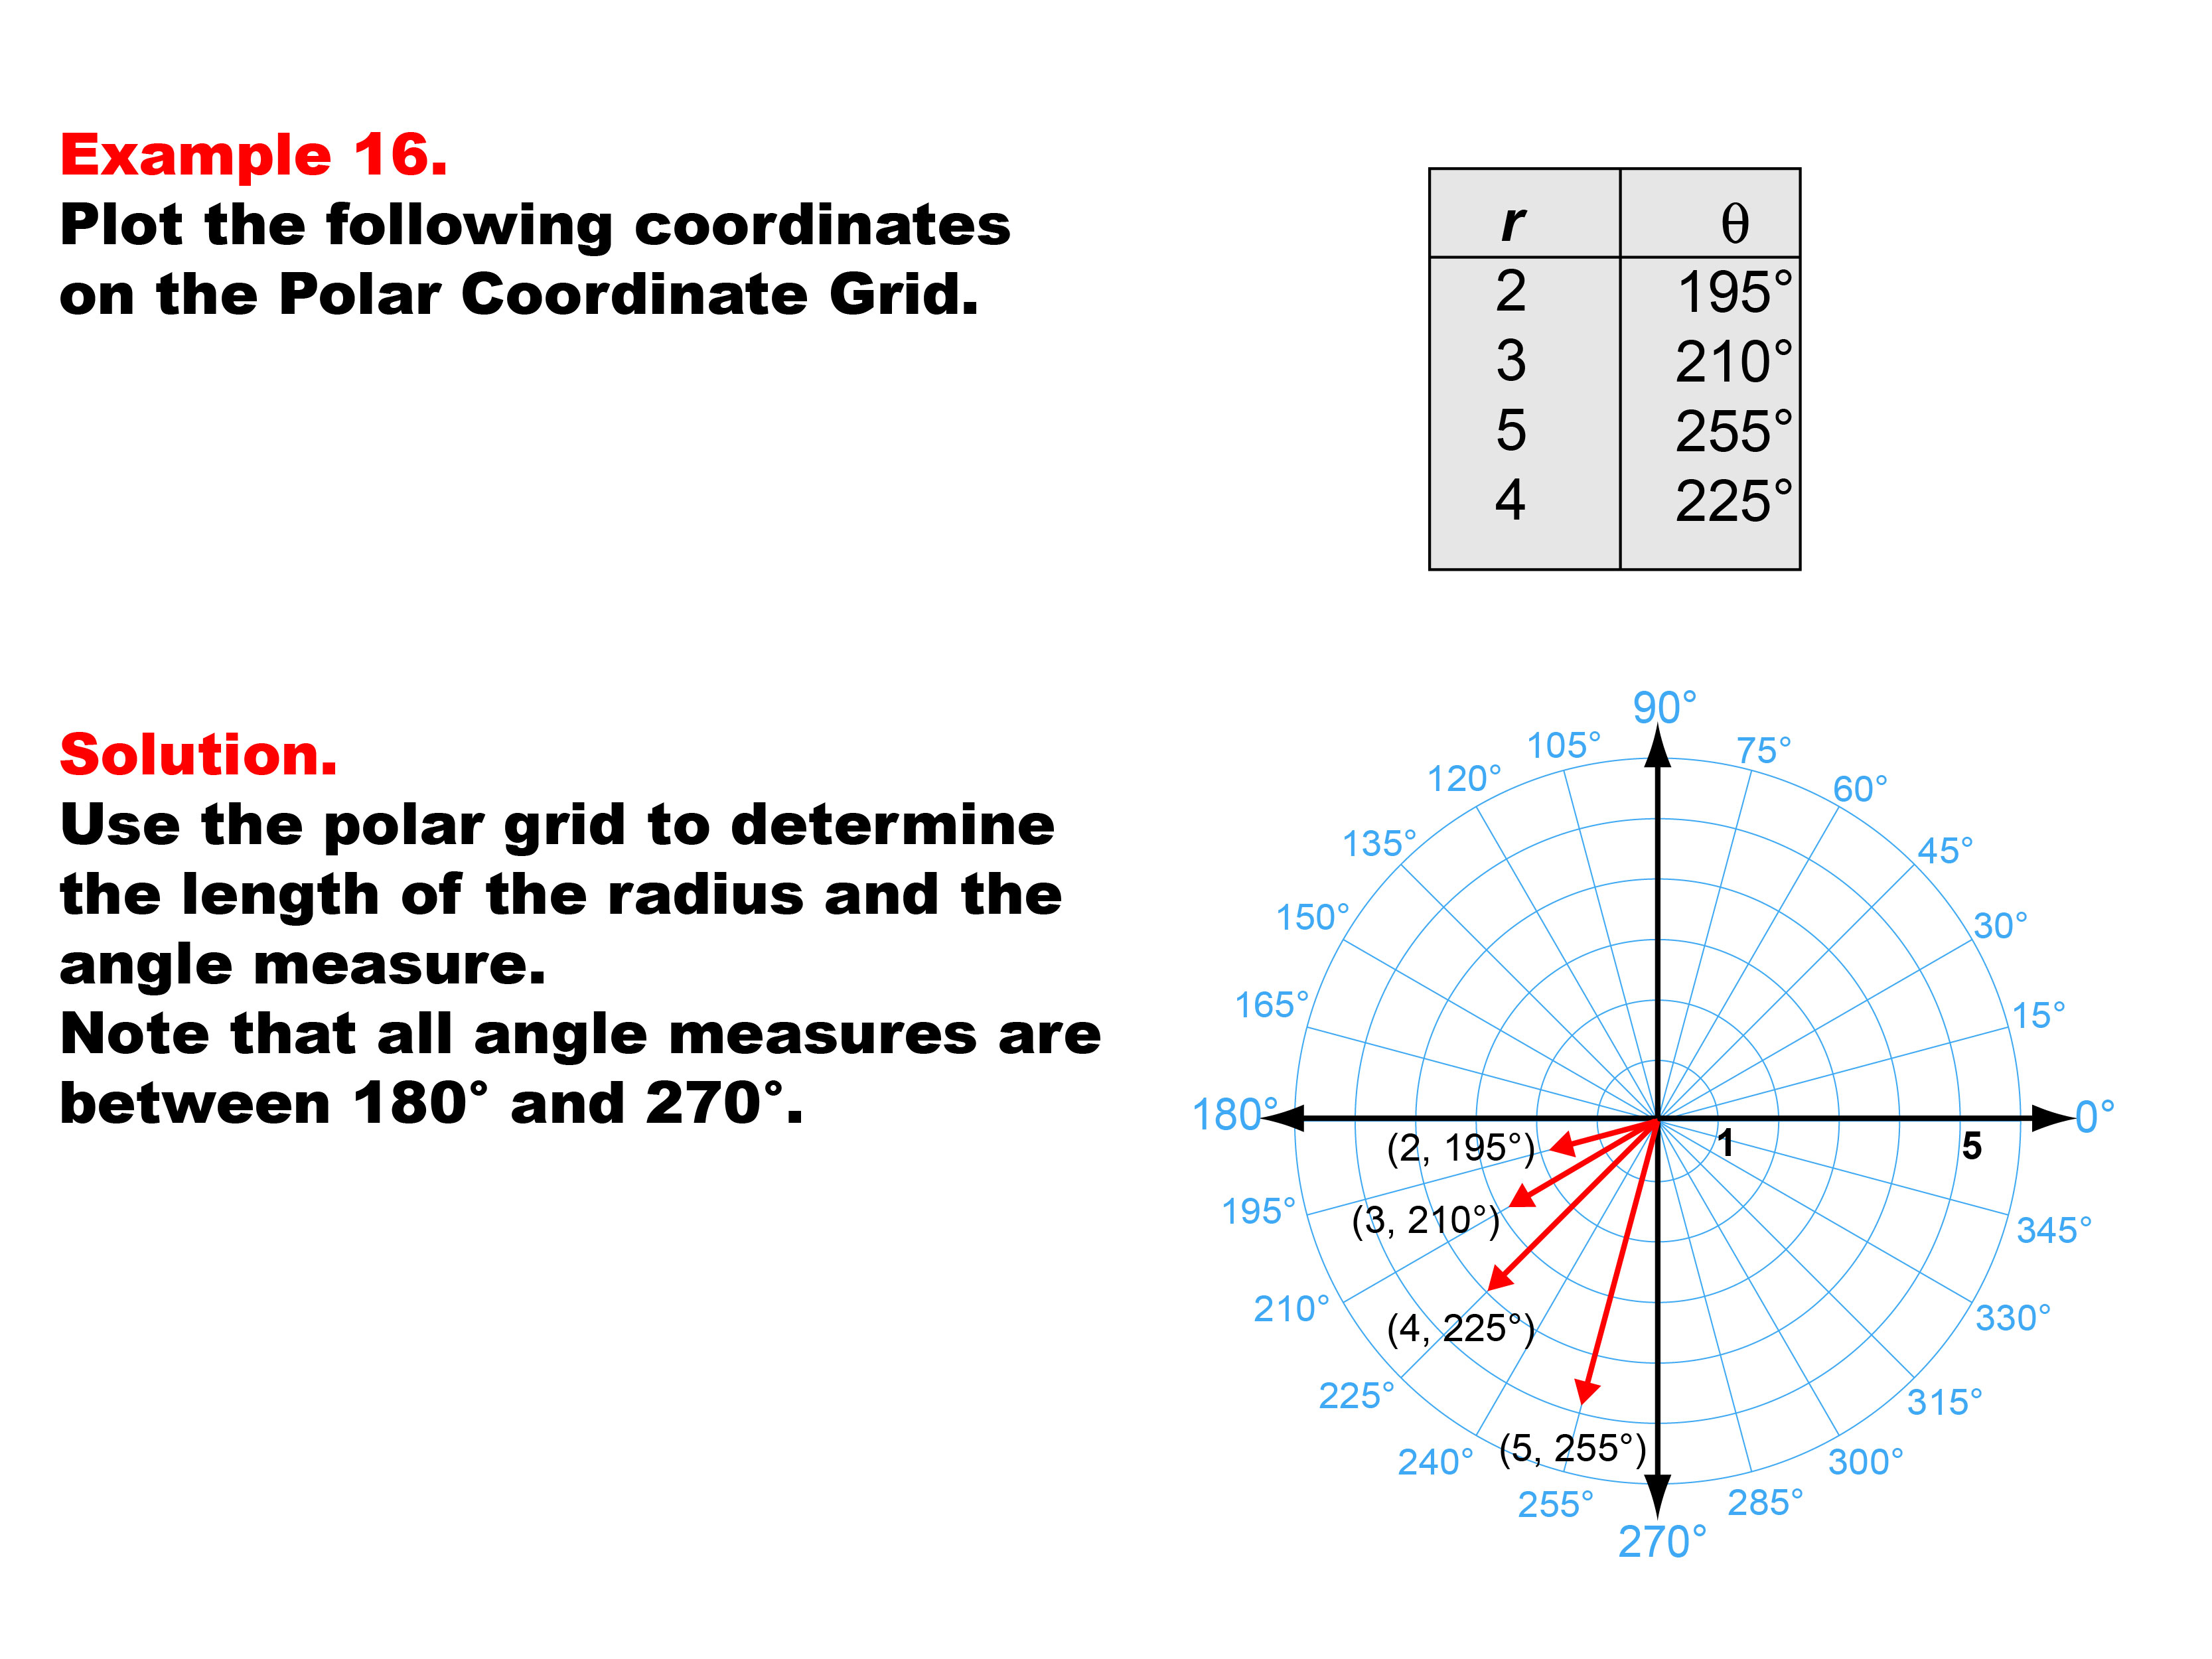 Coordinate Systems: Example 16. Graphing coordinates on the Polar Coordinate System for angles greater than 180 degrees and less than 270 degrees.